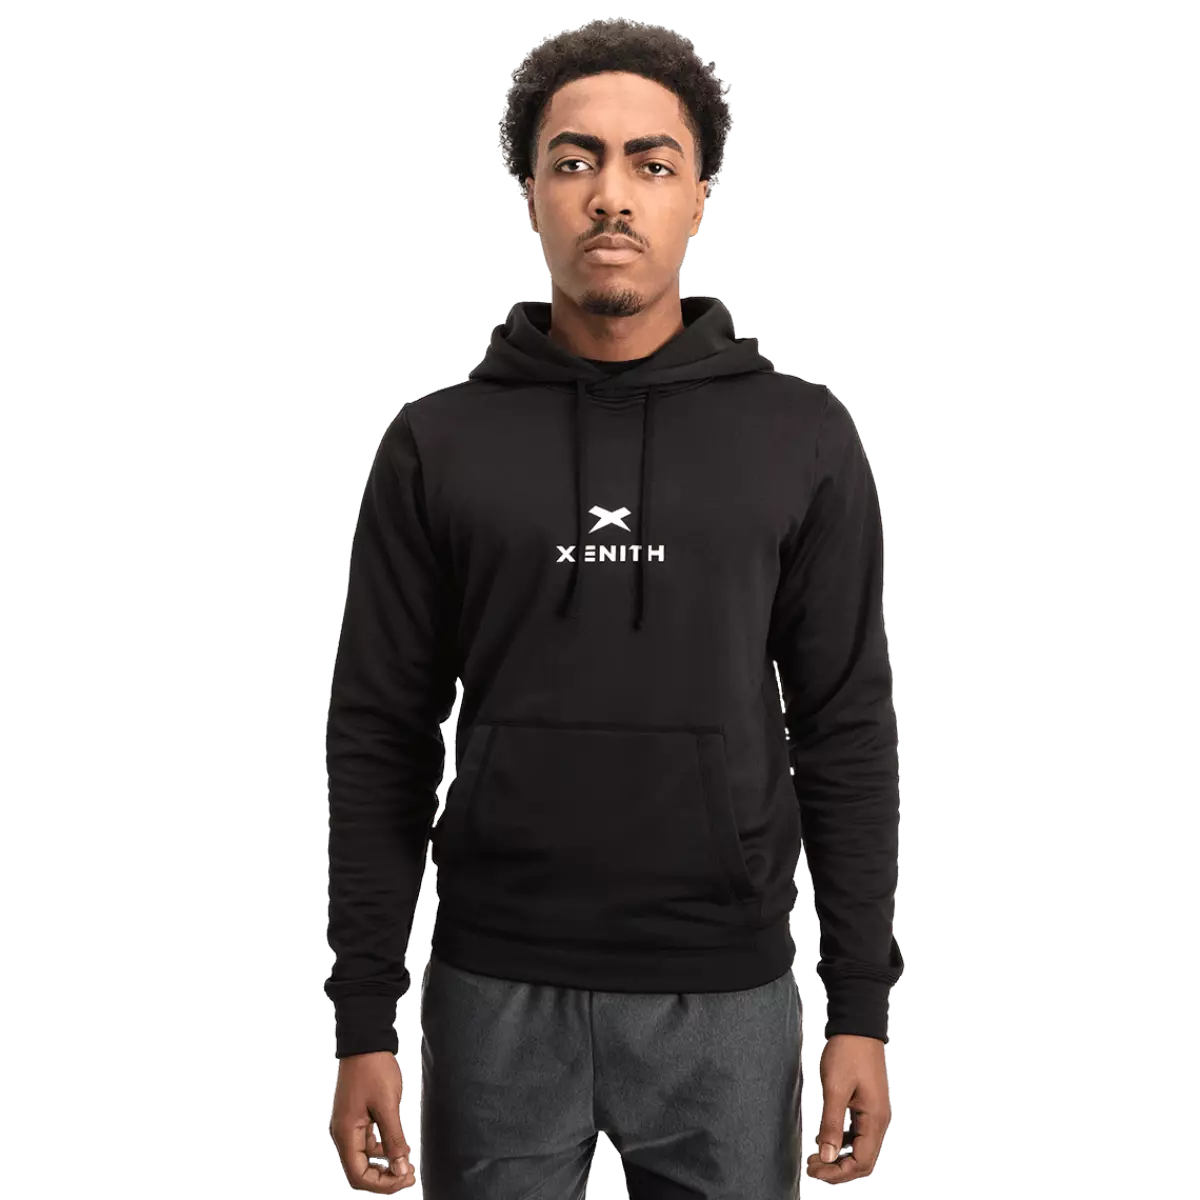 Male model wearing black hoodie with white Xenith-X logo and wordmark.